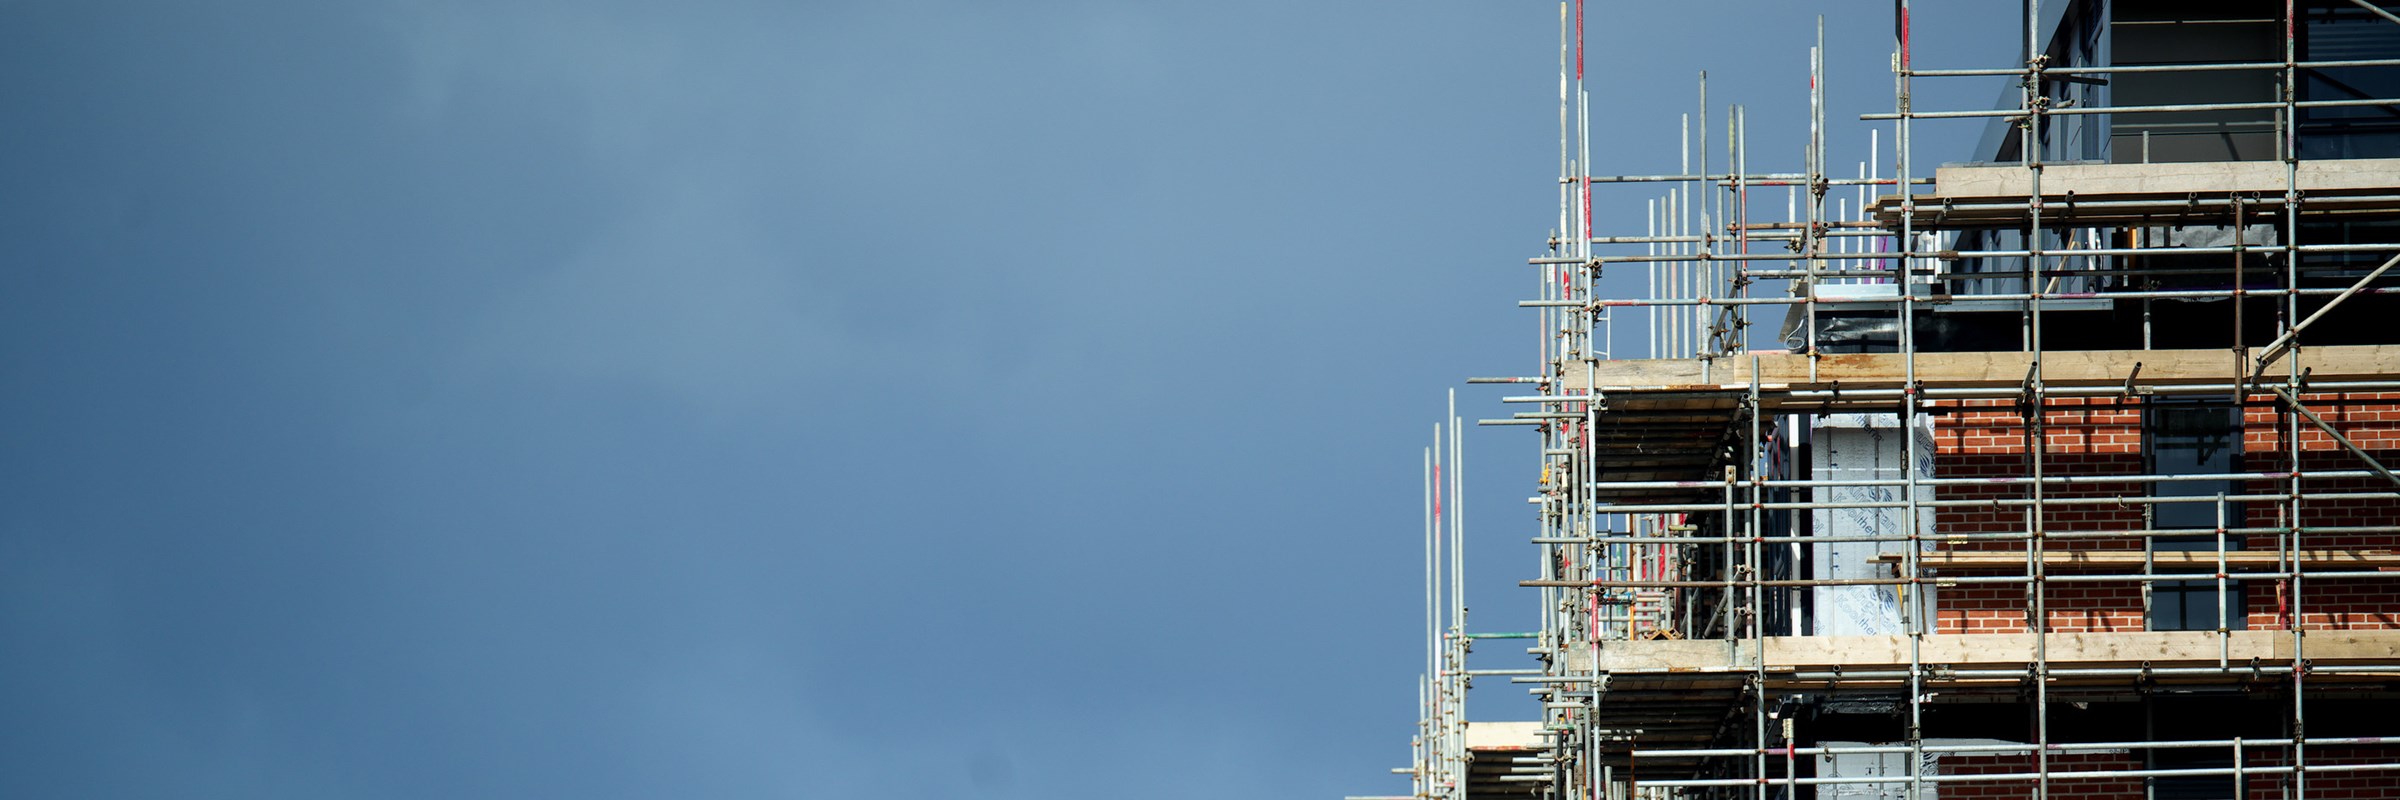 Scaffolding of tall tower with clouds and sky in background